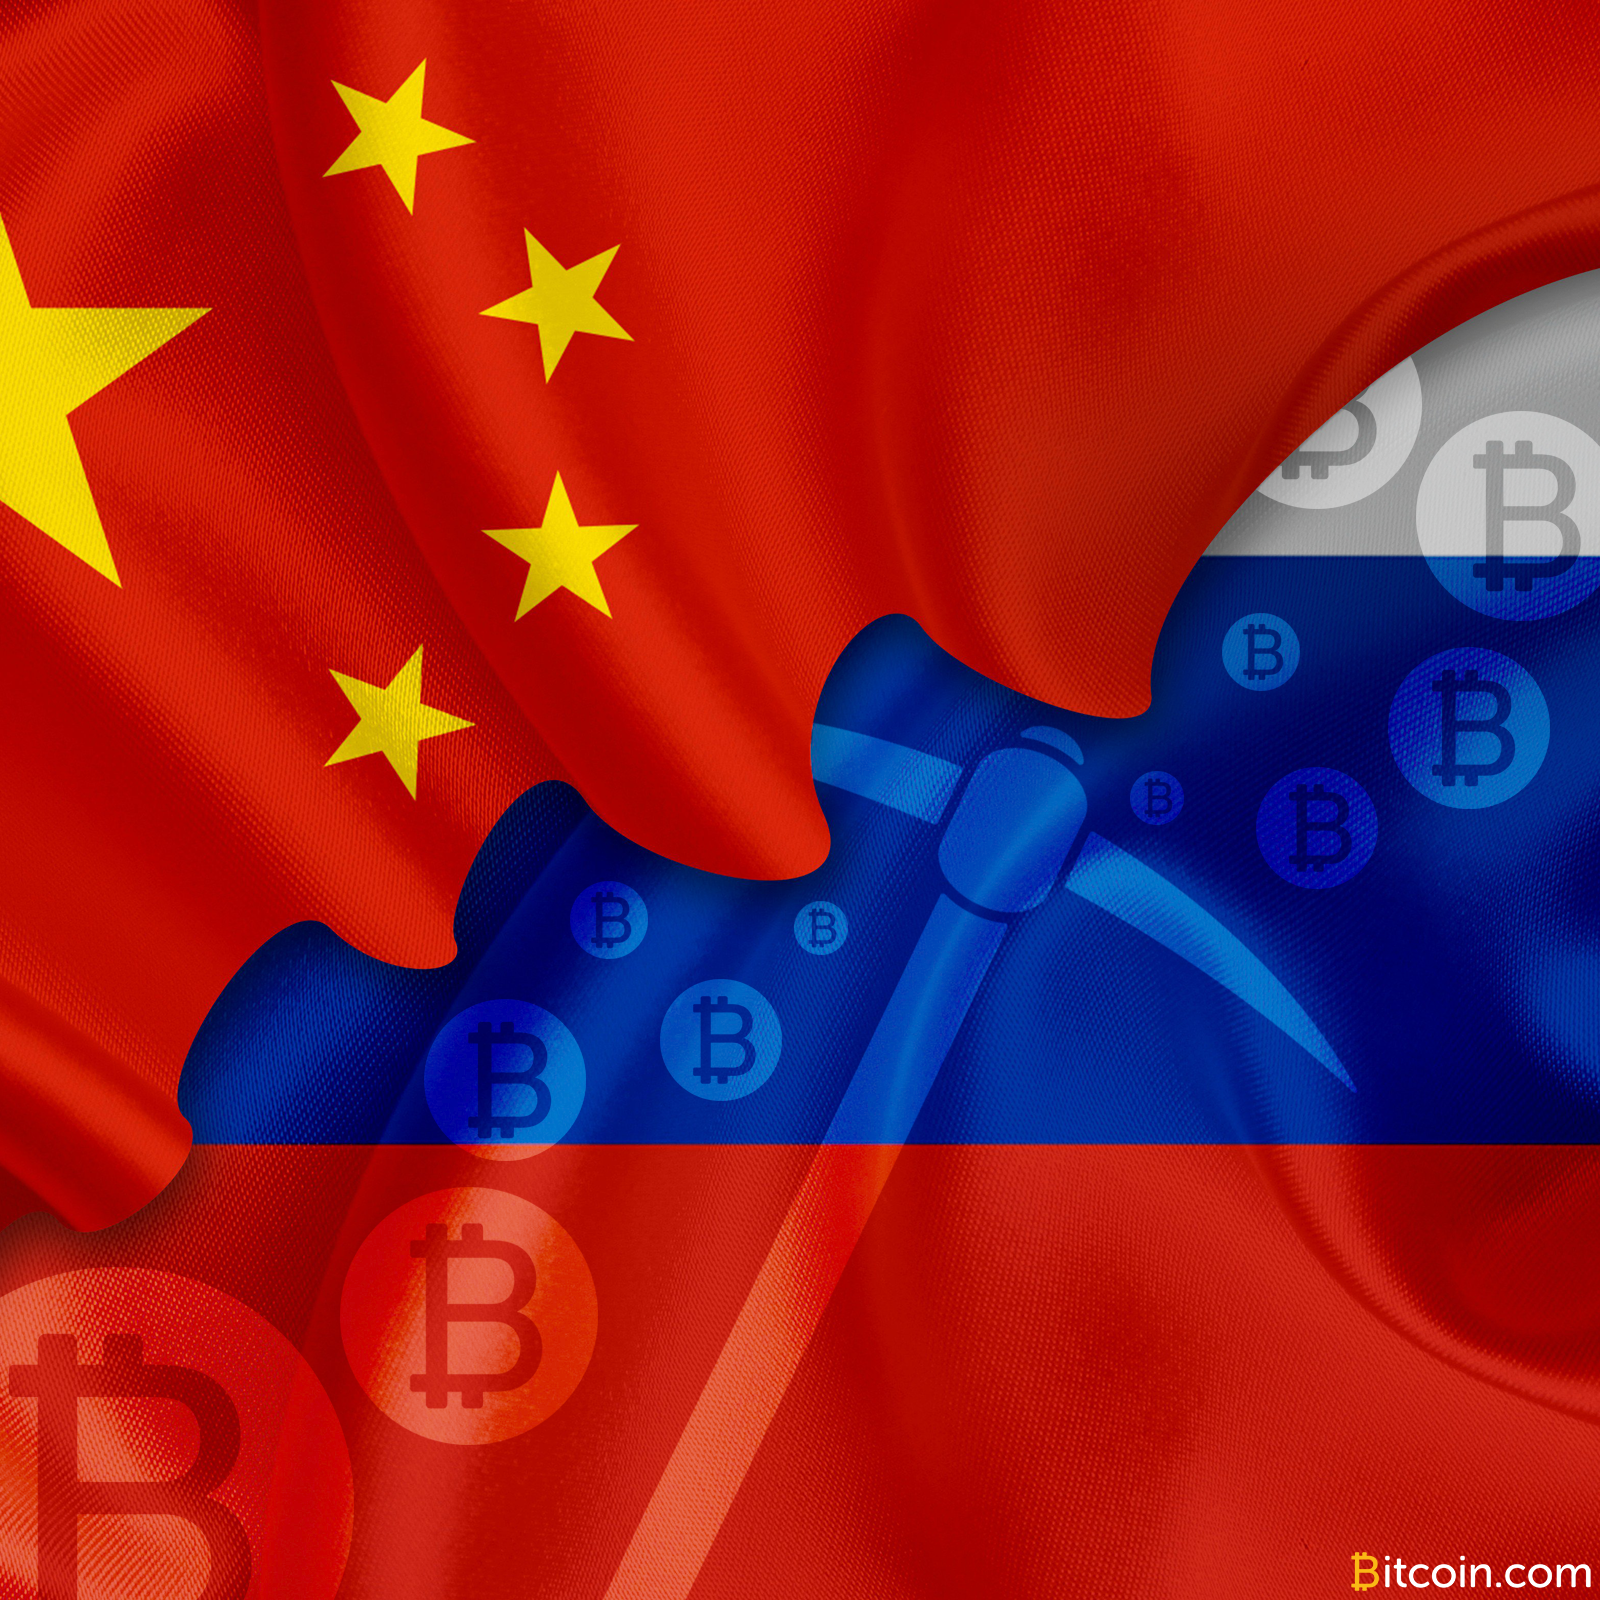 Russian Miner Coin Wants To Challenge China for Bitcoin Mining Supremacy